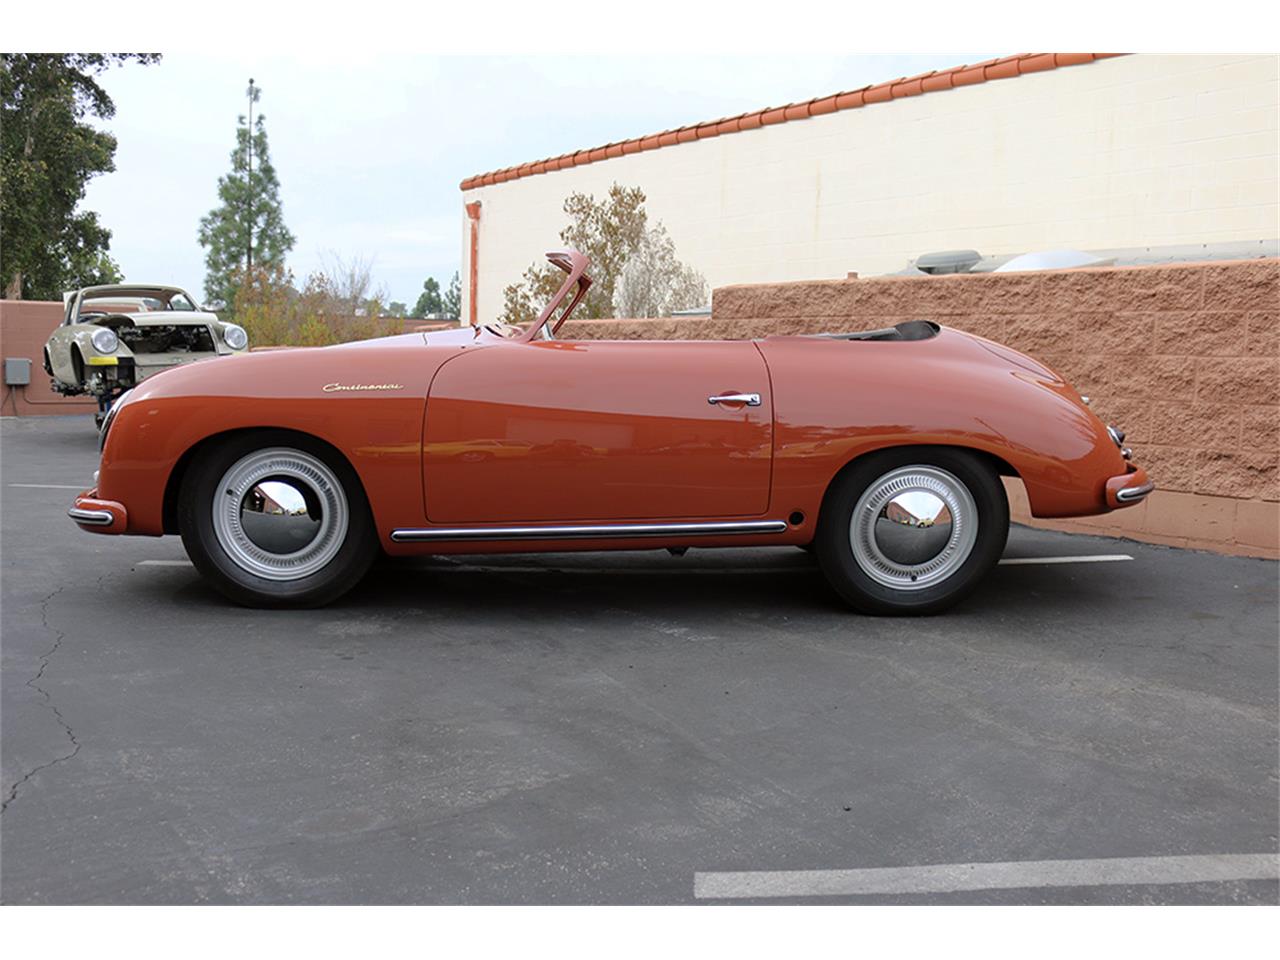 1955 Porsche 356 Continental Cabriolet for sale in Fallbrook, CA – photo 5